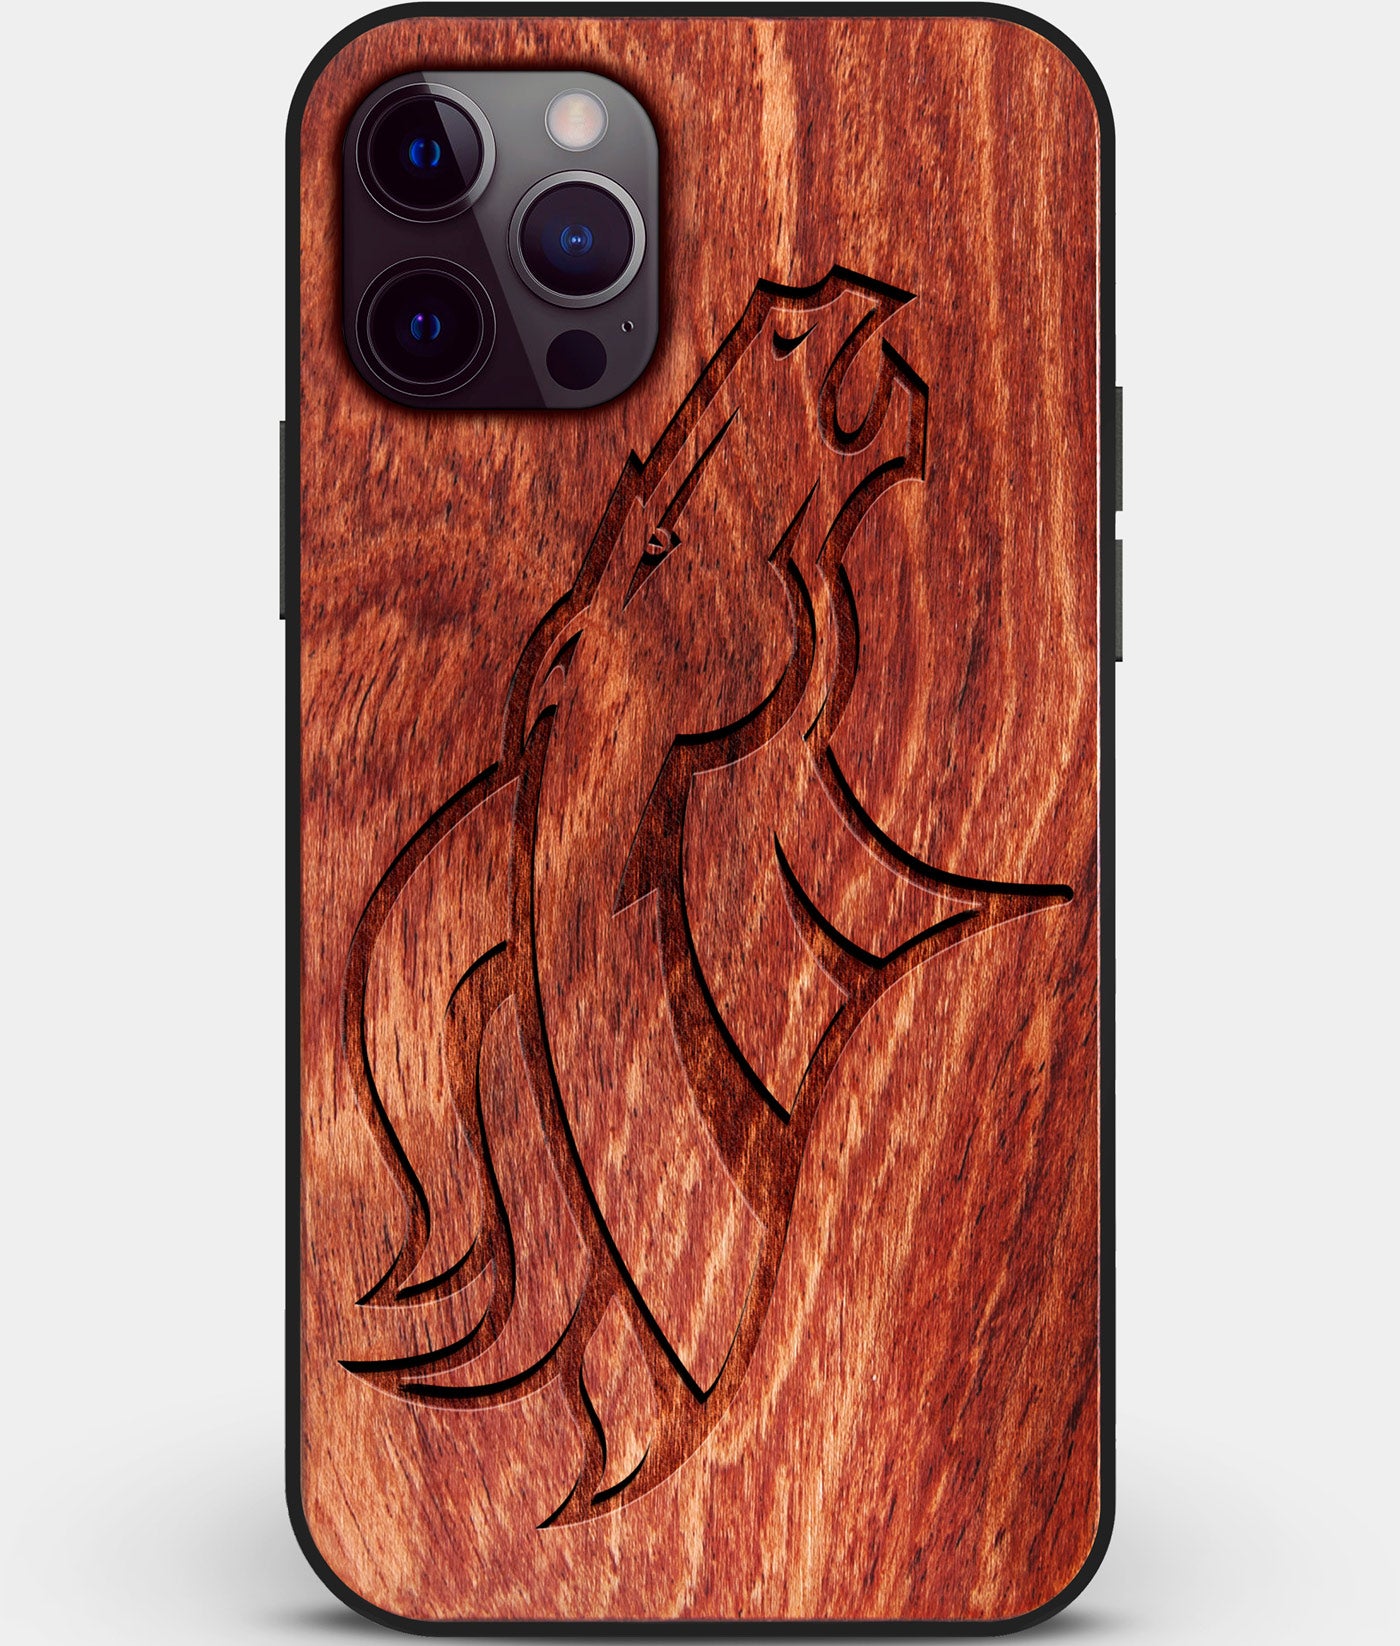 Custom Carved Wood Denver Broncos iPhone 12 Pro Case | Personalized Mahogany Wood Denver Broncos Cover, Birthday Gift, Gifts For Him, Monogrammed Gift For Fan | by Engraved In Nature